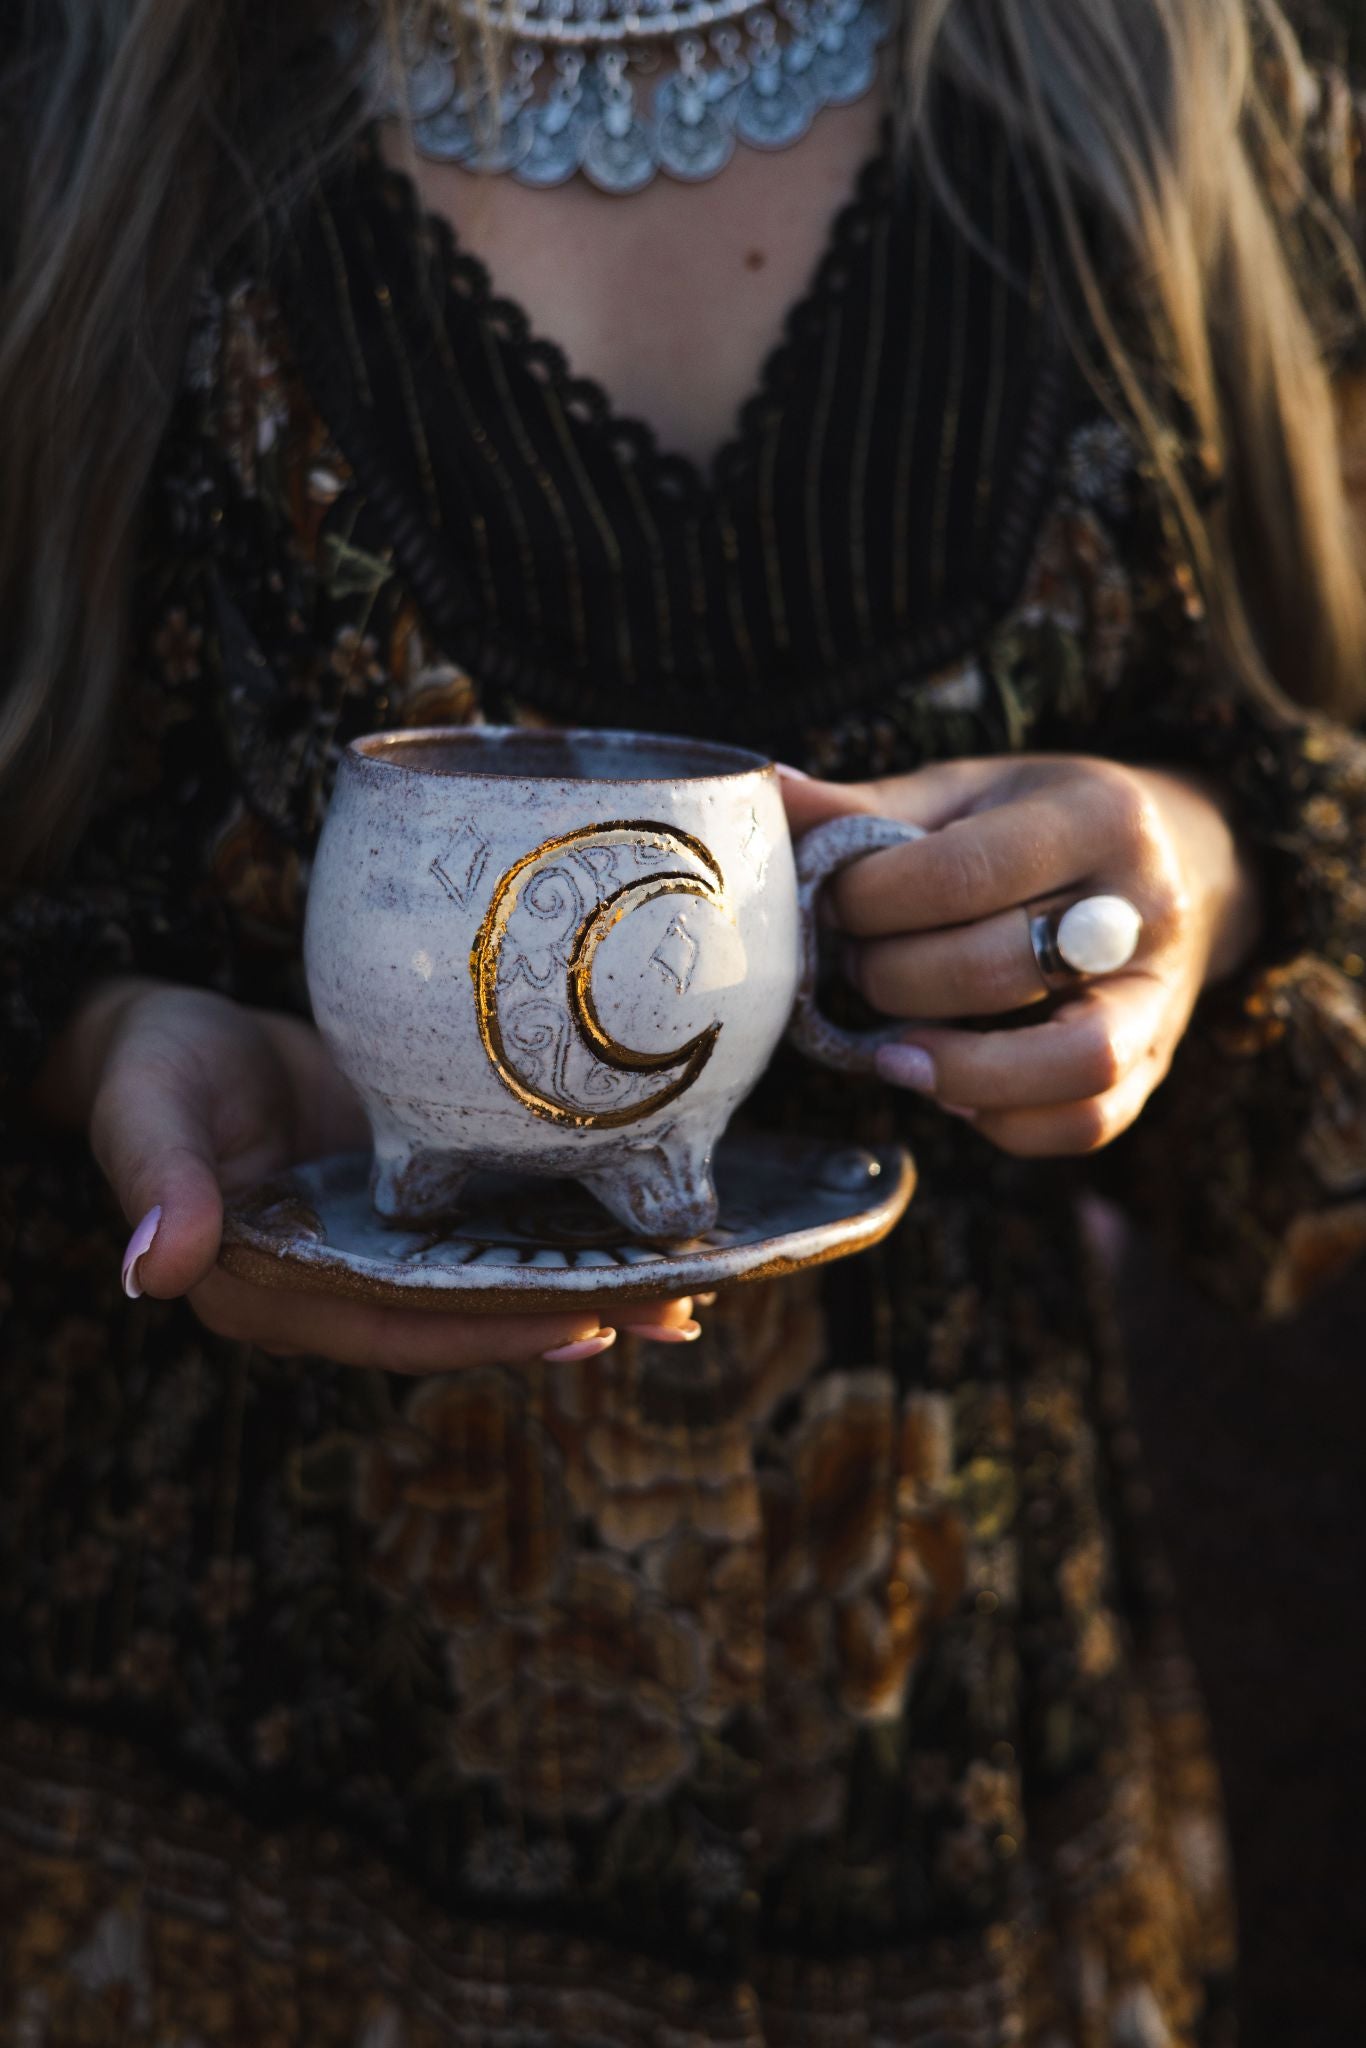 Sacred Full Moon - Sun and Moon Ceramic Cup with feet